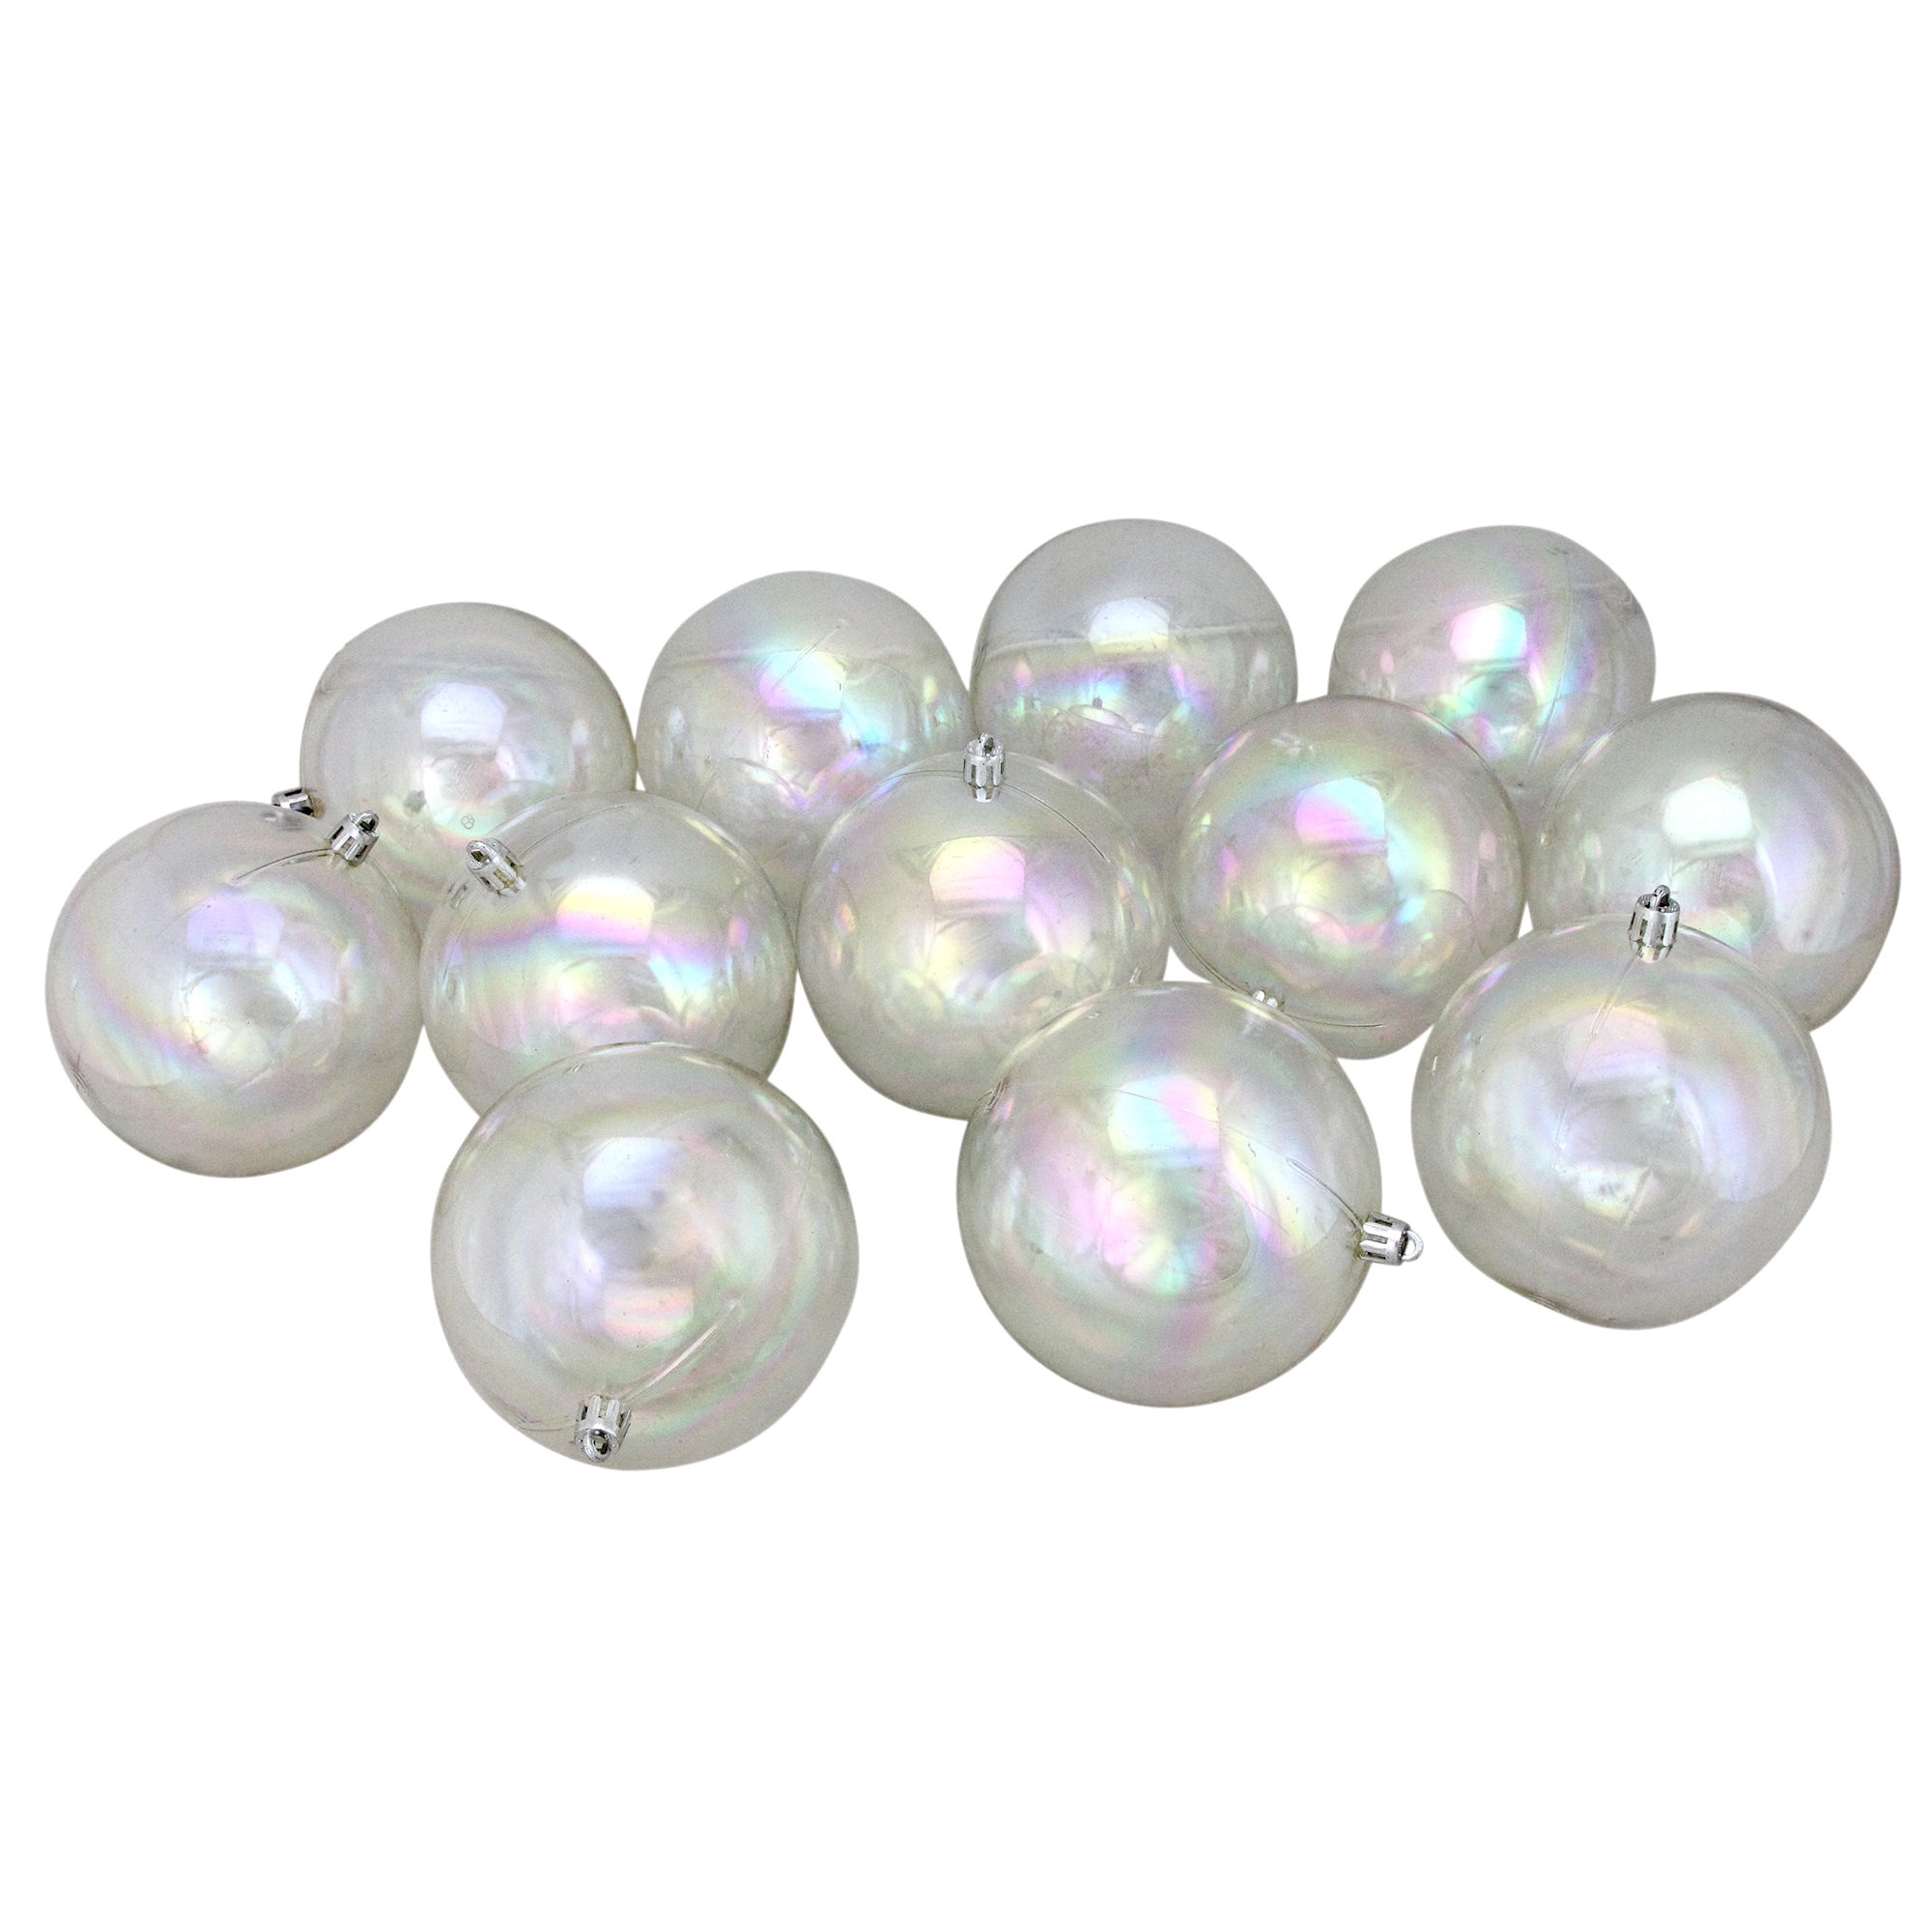  Funtery Christmas Iridescent Plastic Ornaments Balls Set Clear  Iridescent Christmas Ornaments Fillable Ball Large Iridescent Ornaments for  Holiday Party Tree Decorations(120 Pcs, Iridescence Style) : Everything Else